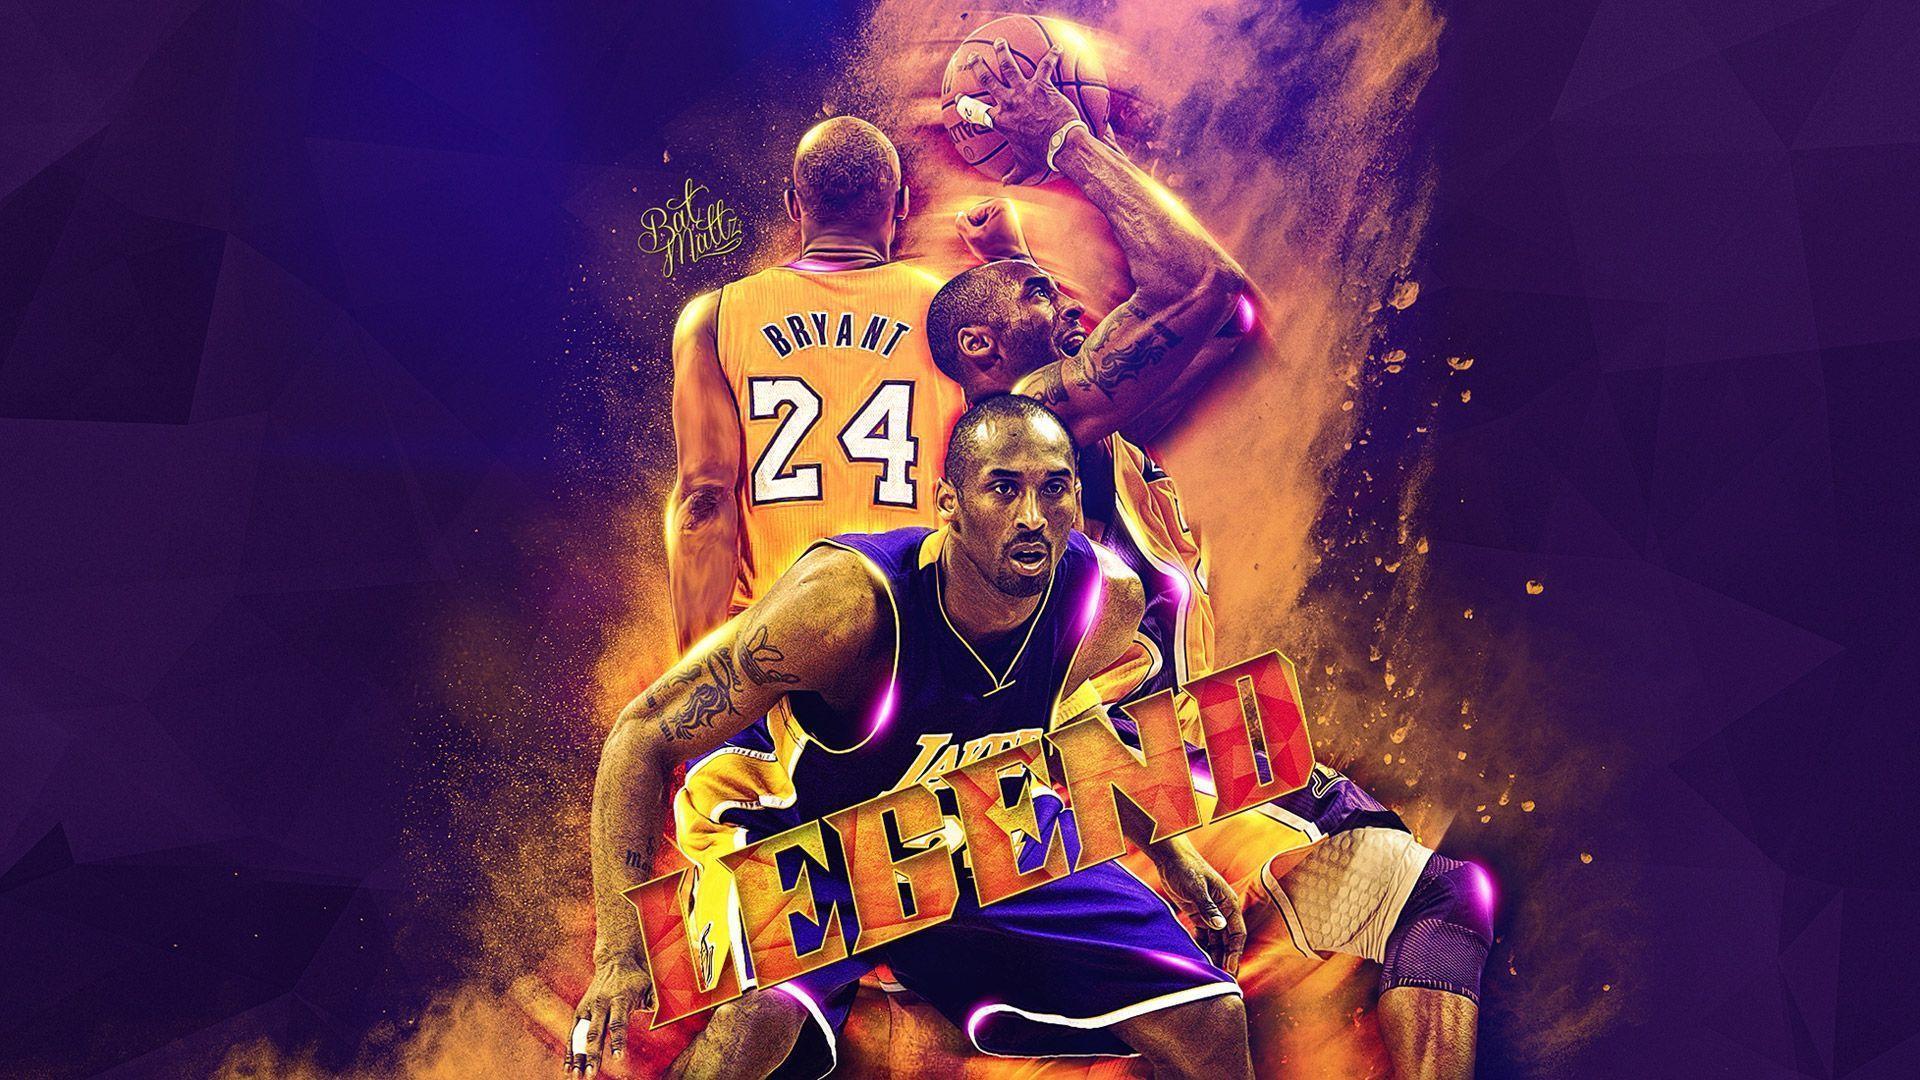 Kobe Bryant Cool Wallpapers for Phone  HeroScreen Wallpapers  Kobe bryant  wallpaper Kobe bryant iphone wallpaper Kobe bryant